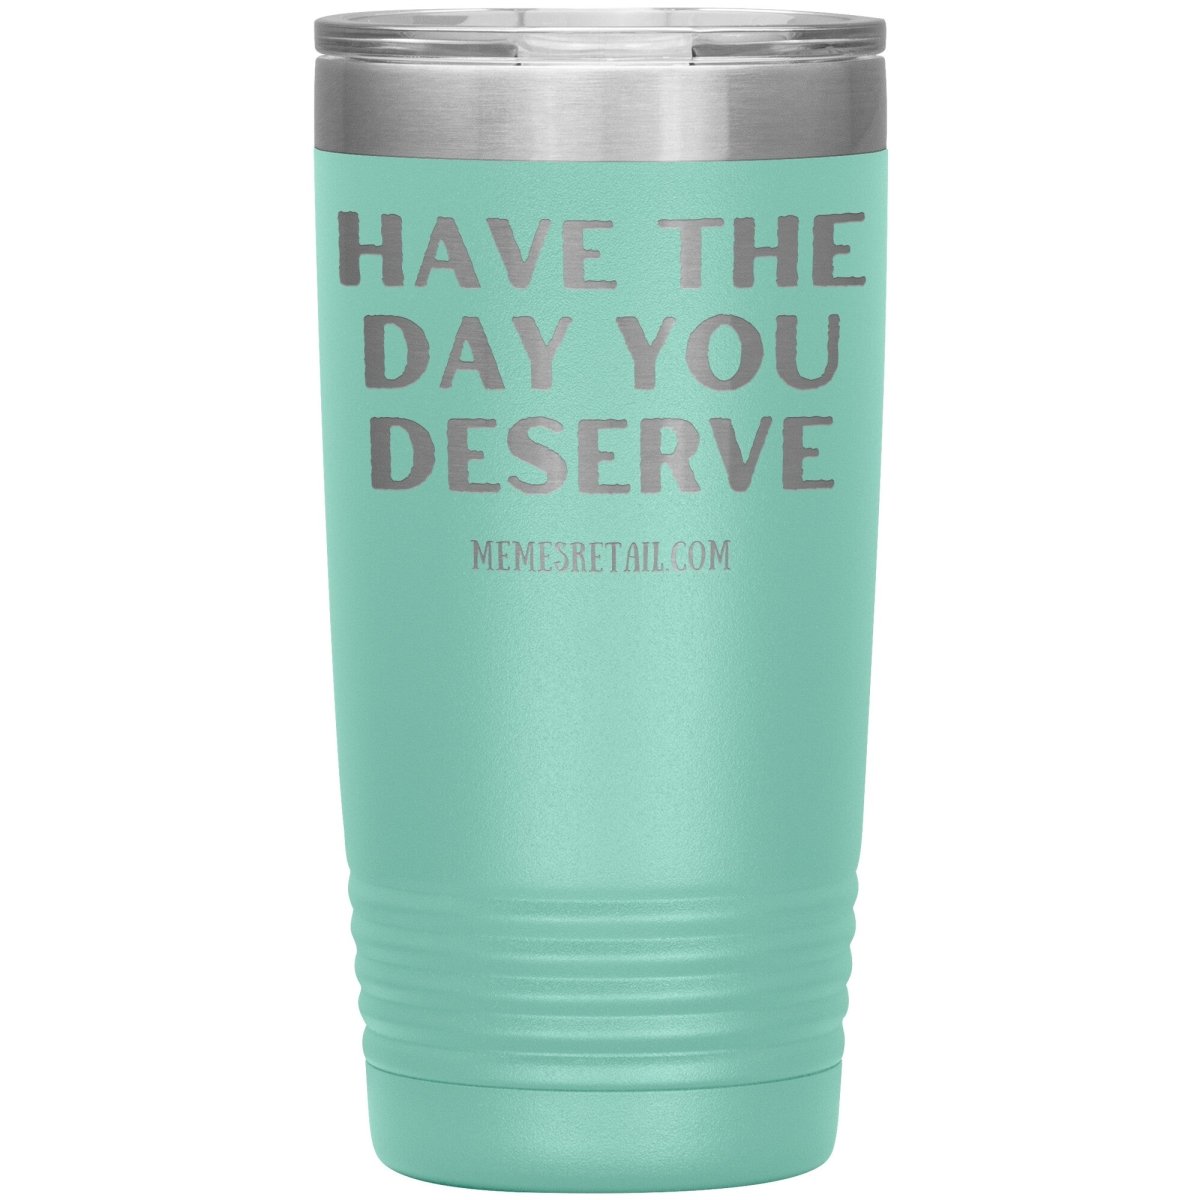 Have the Day You Deserve Tumblers, 20oz Insulated Tumbler / Teal - MemesRetail.com